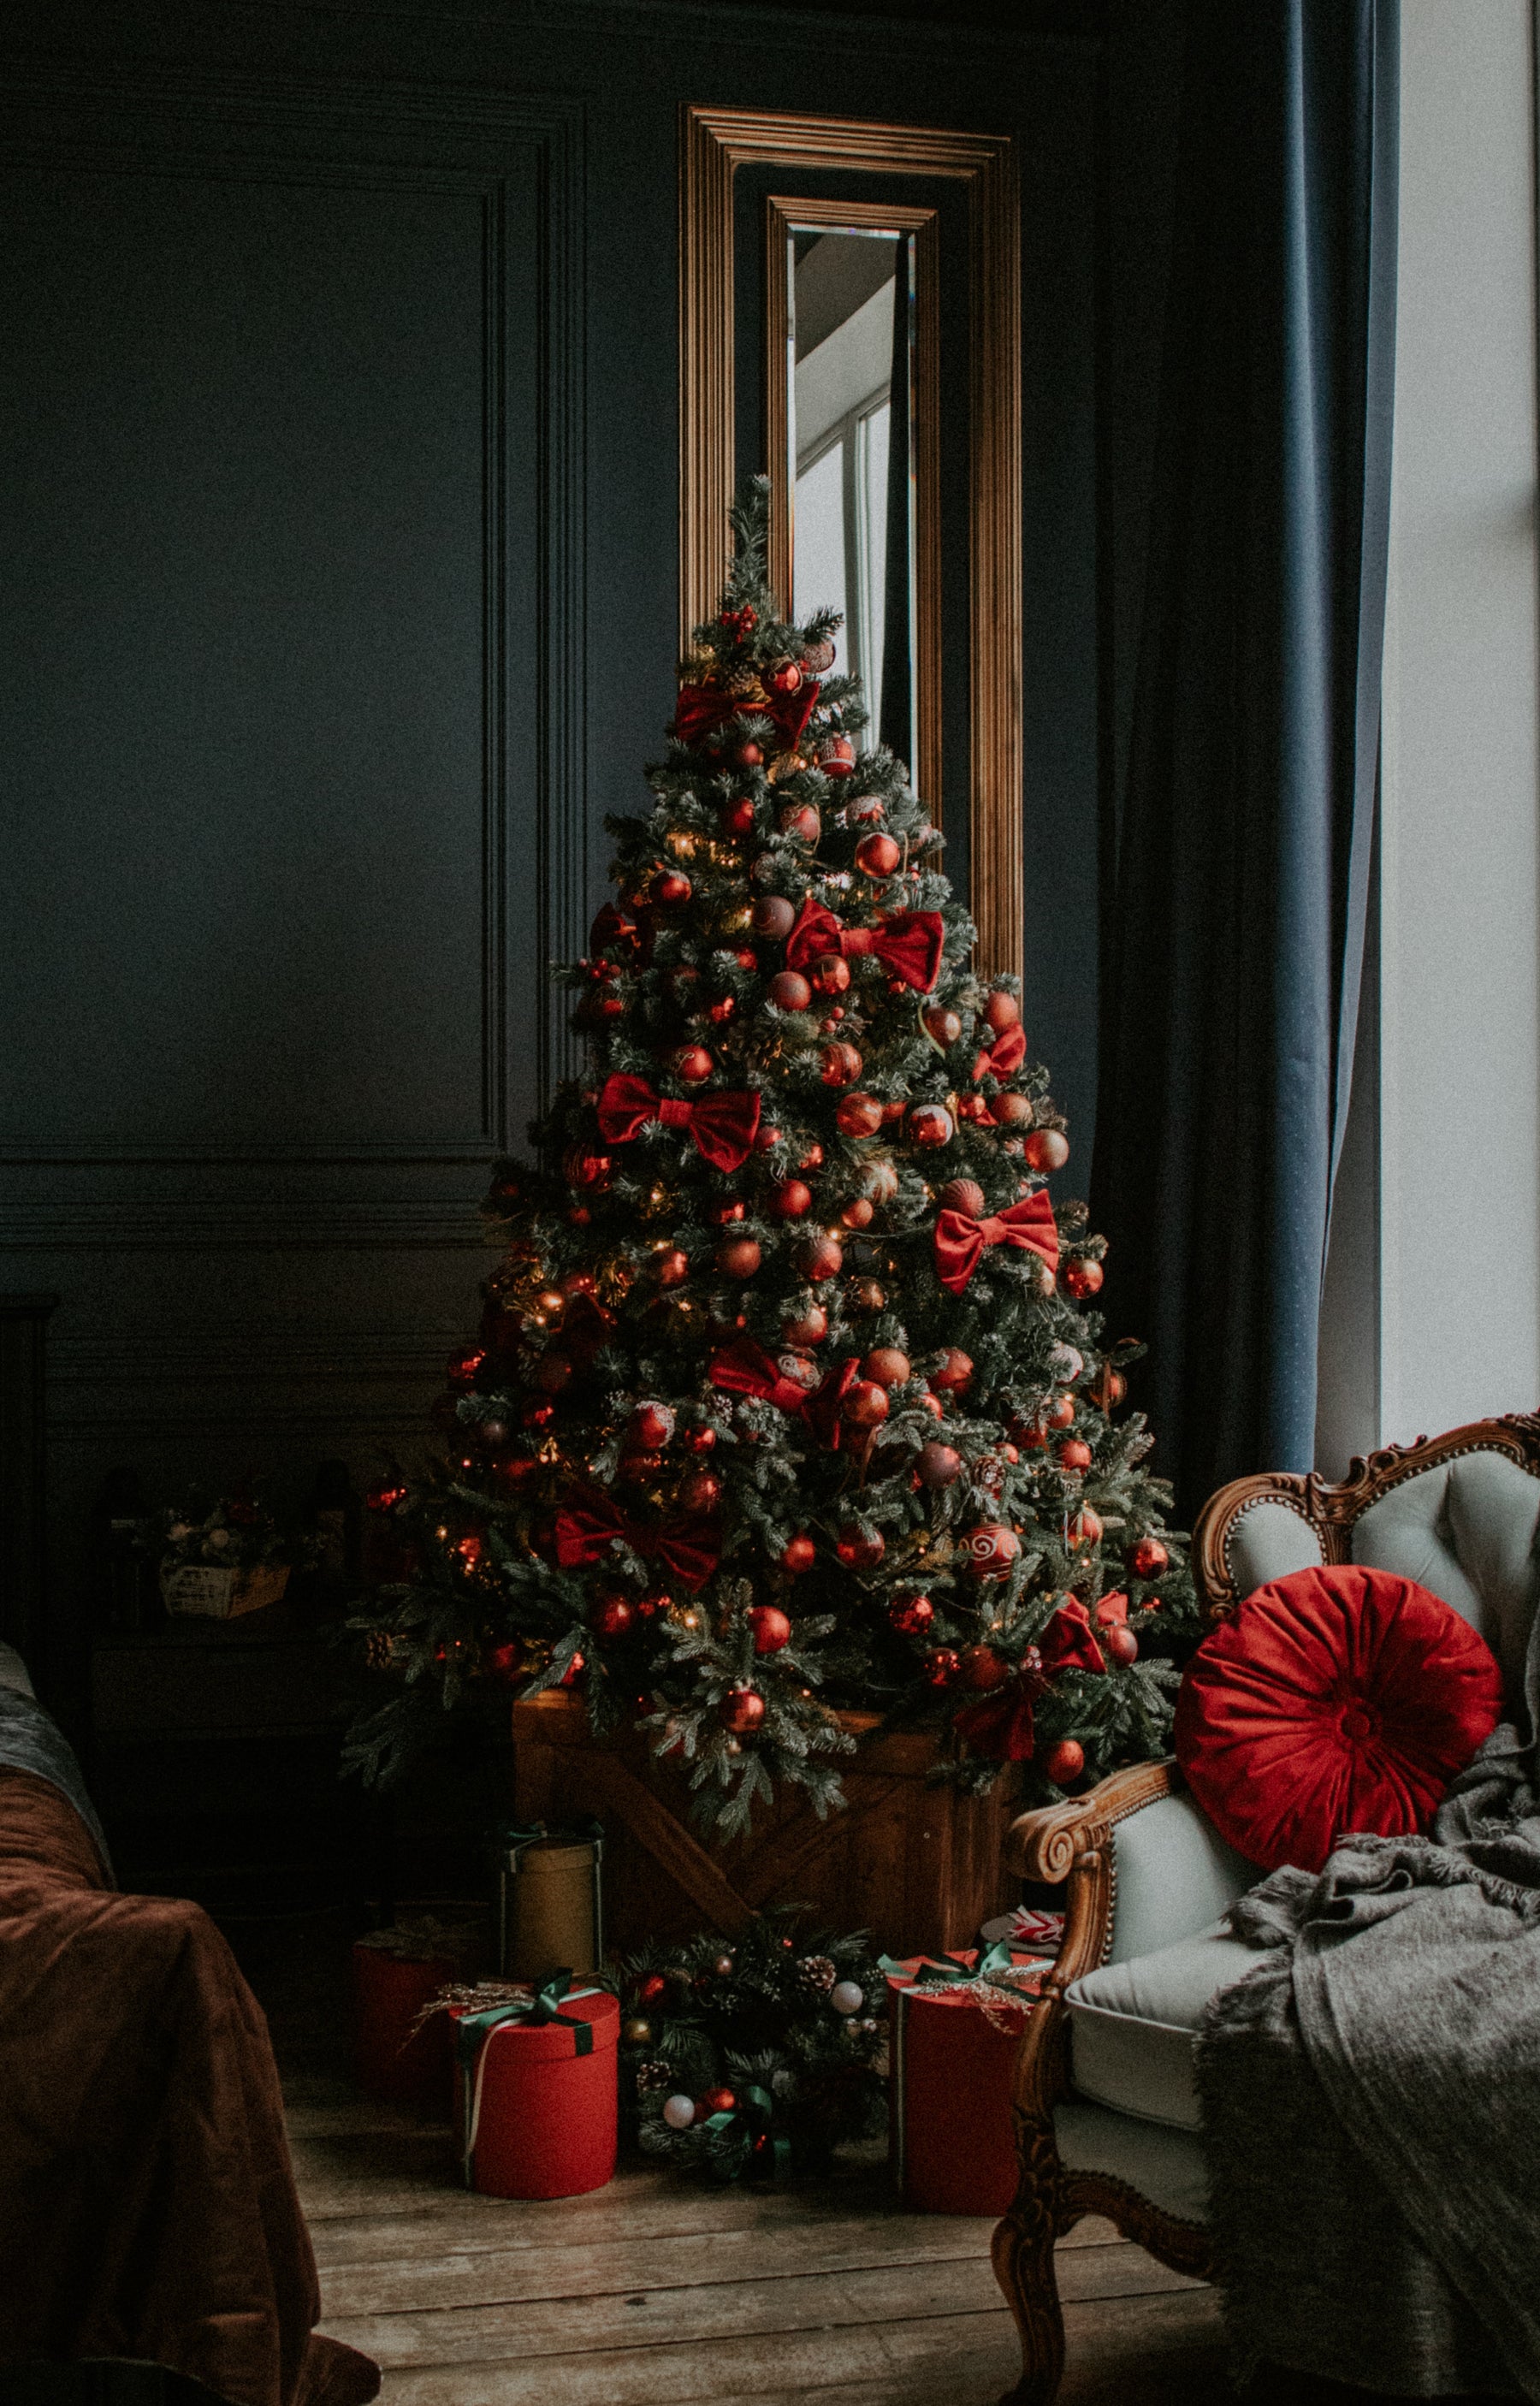 5 Things To Consider When Choosing Your Christmas Decorations